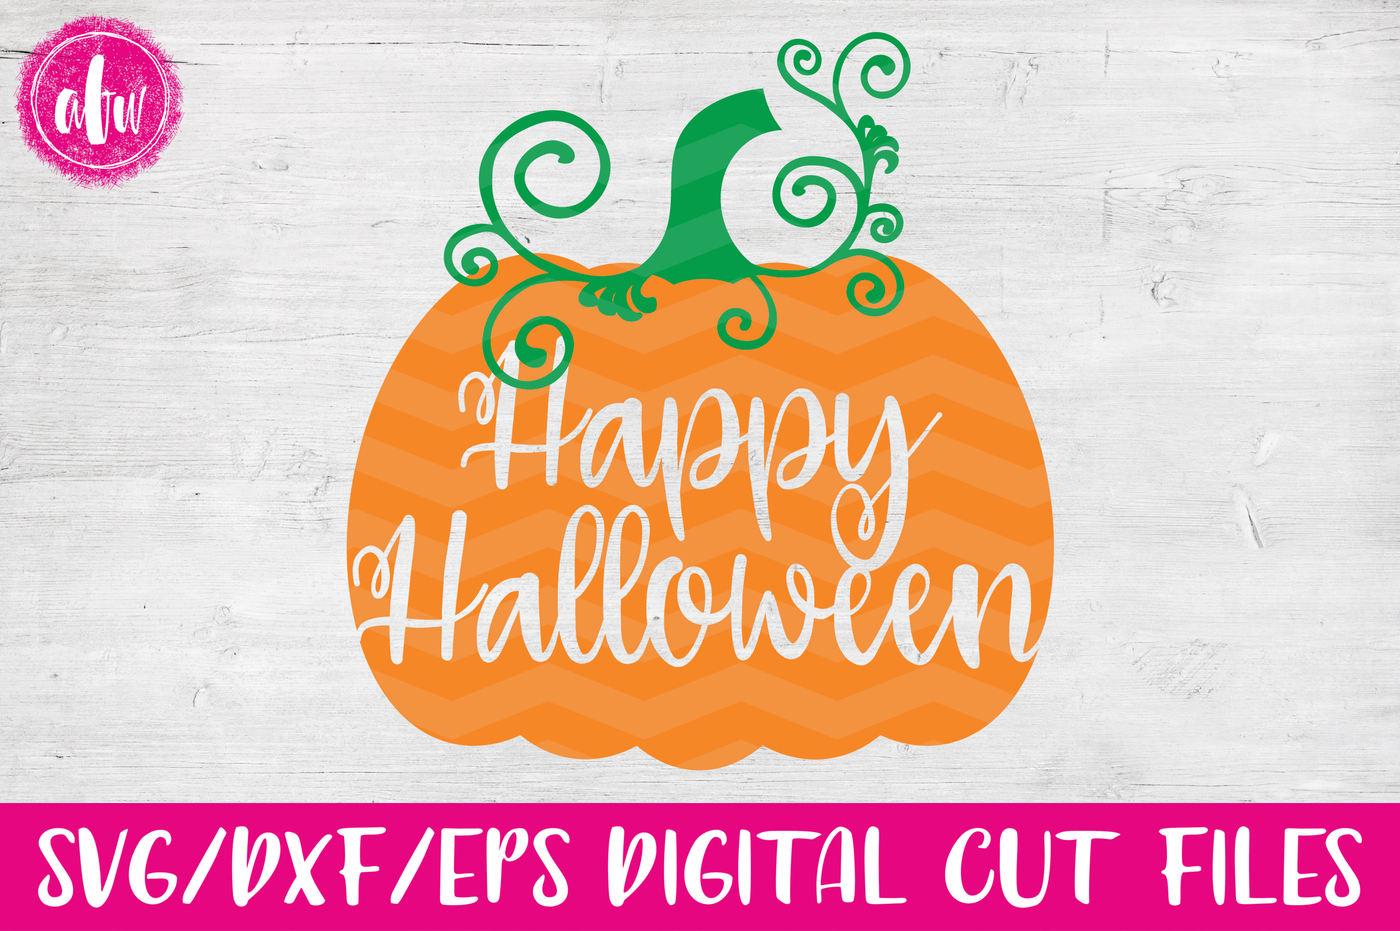 Download Happy Halloween Pumpkin - SVG, DXF, EPS Cut File By AFW Designs | TheHungryJPEG.com